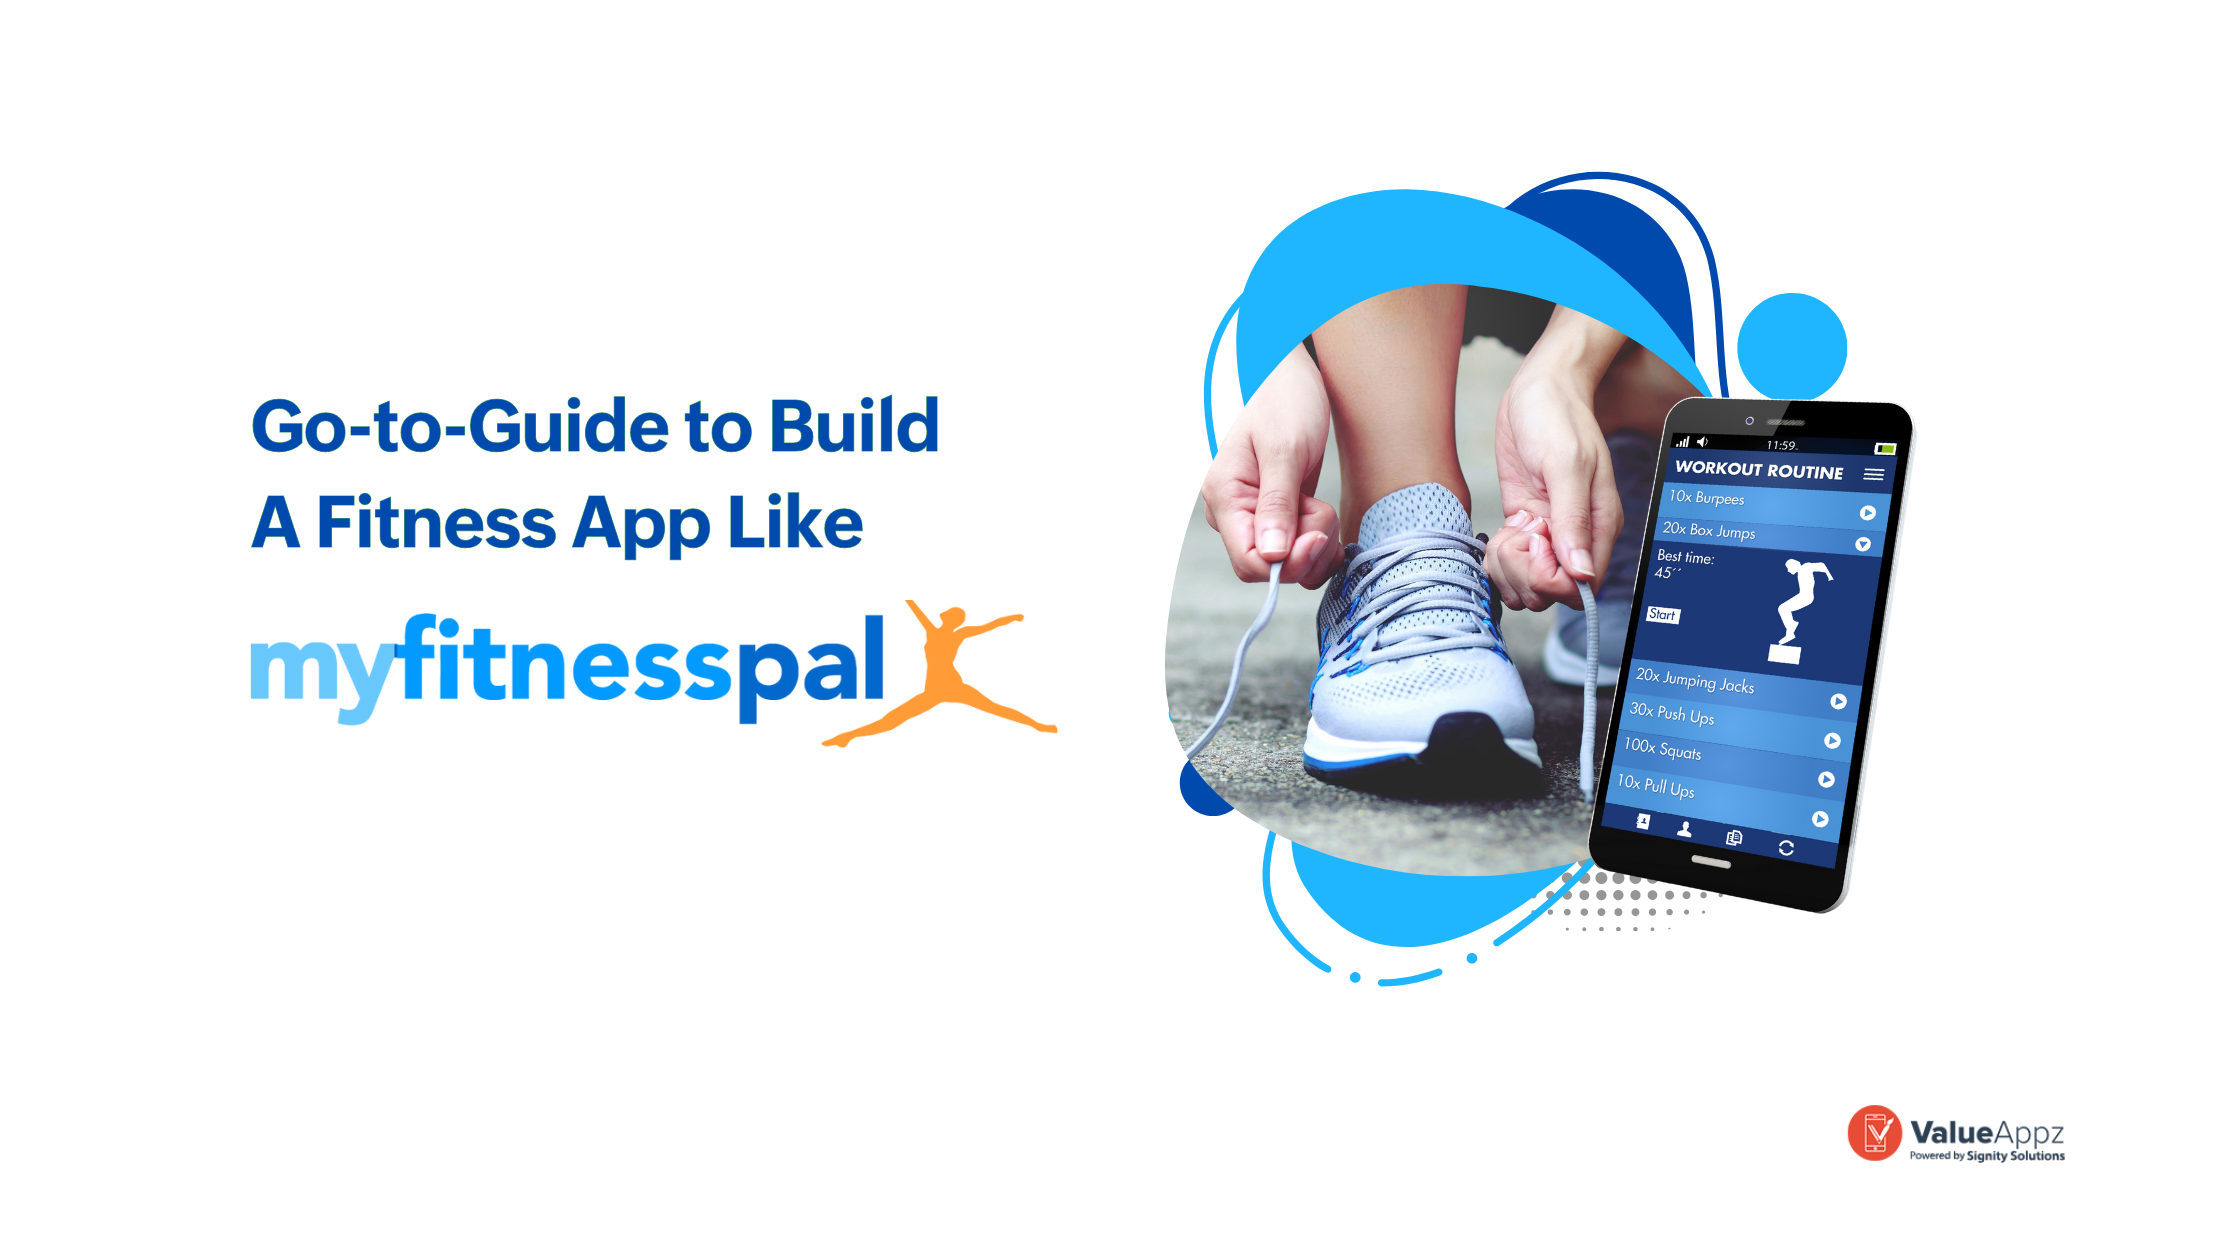 Guide to build an app like MyFitnessPal